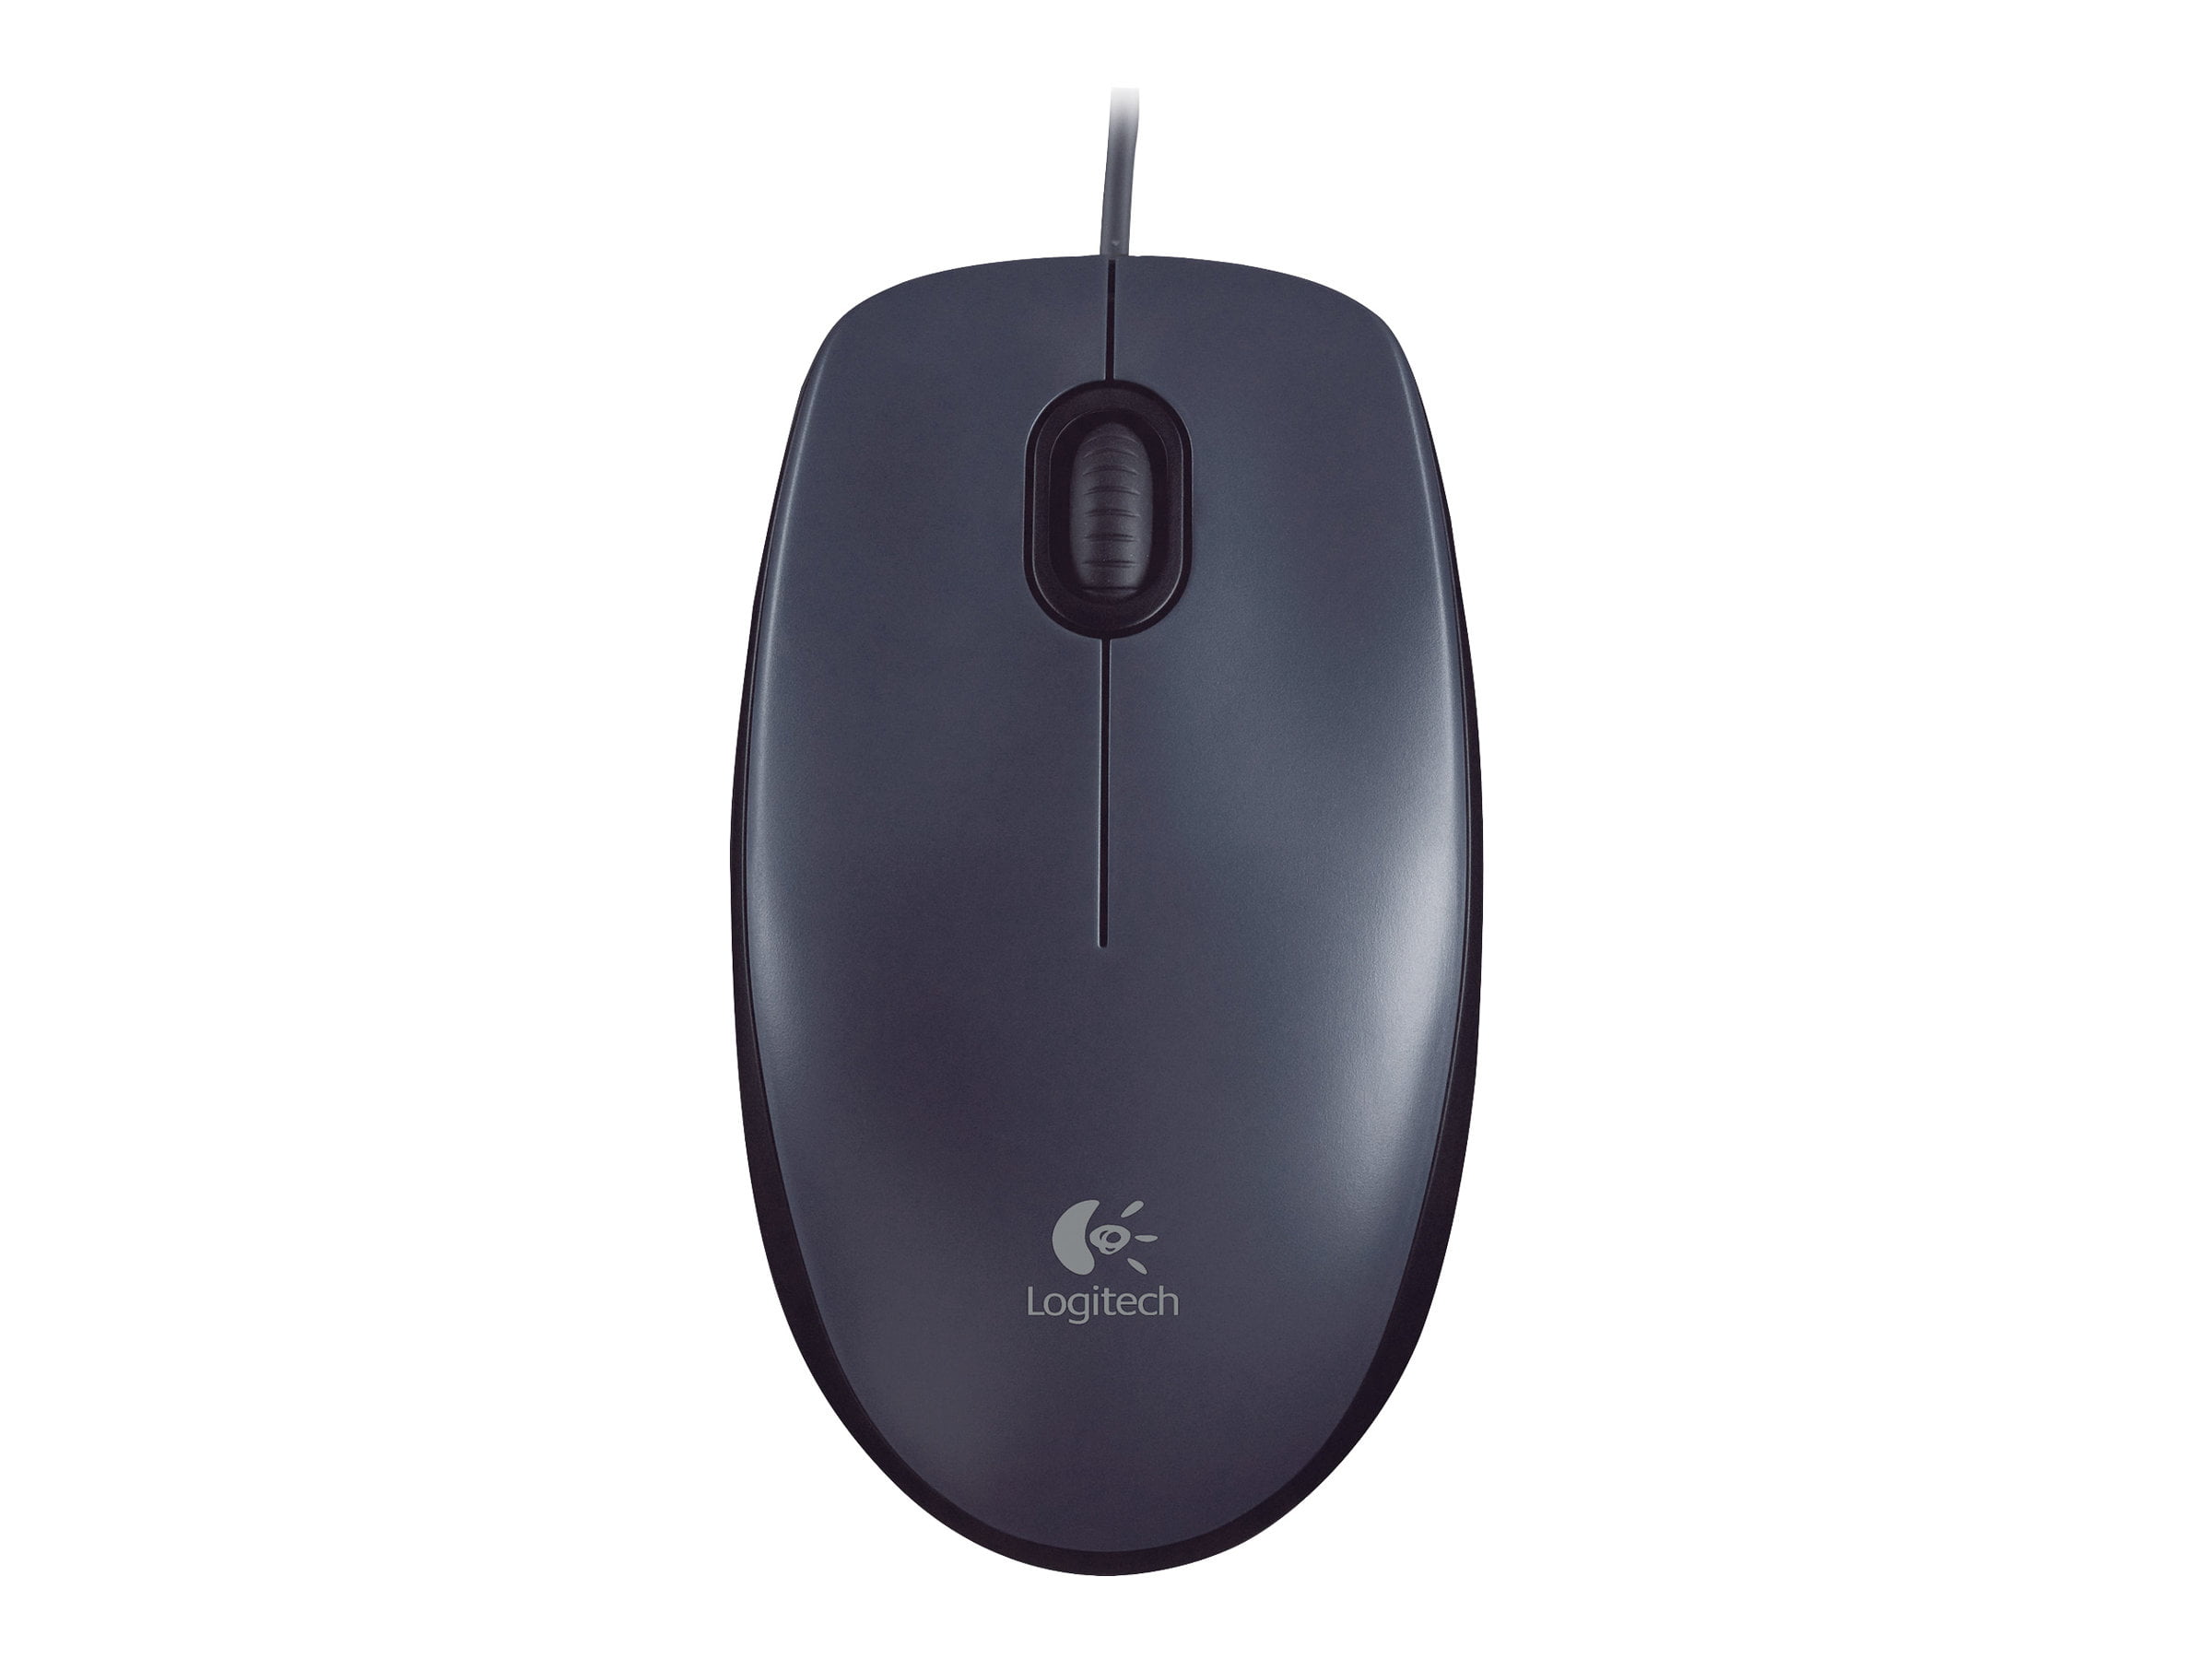 smooth Mac Mouse Size PC Comfort M90 Full DPI Optical Logitech moverL 1000 Laptop Wired for USB